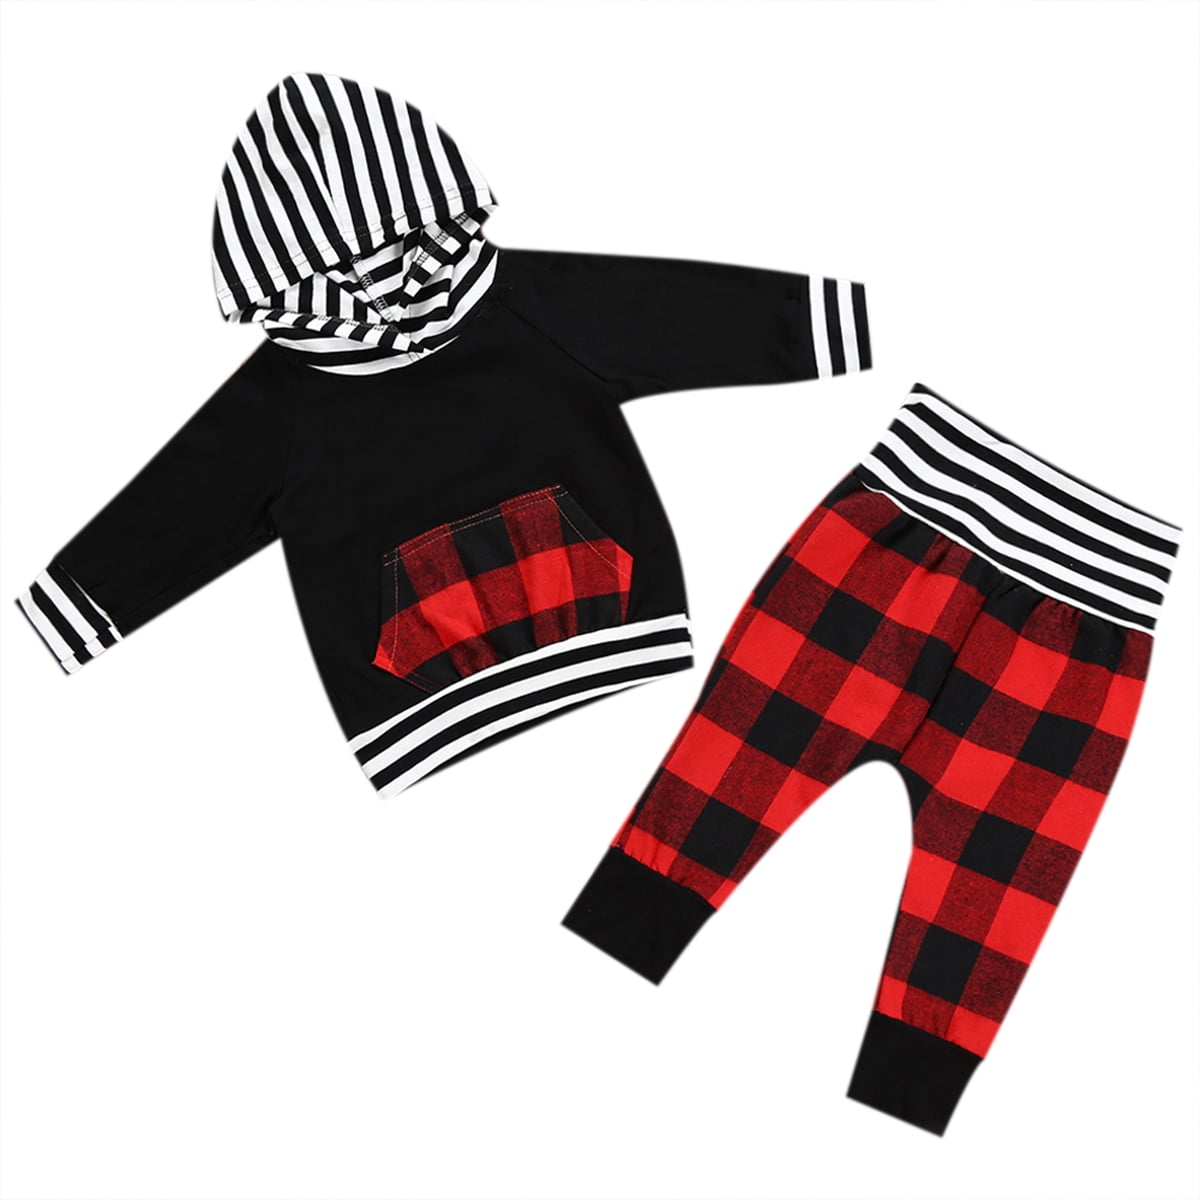 Onefa Boys Girls Infant Toddler Baby Plaid Hooded Pullover Tops Pants Outfits Set